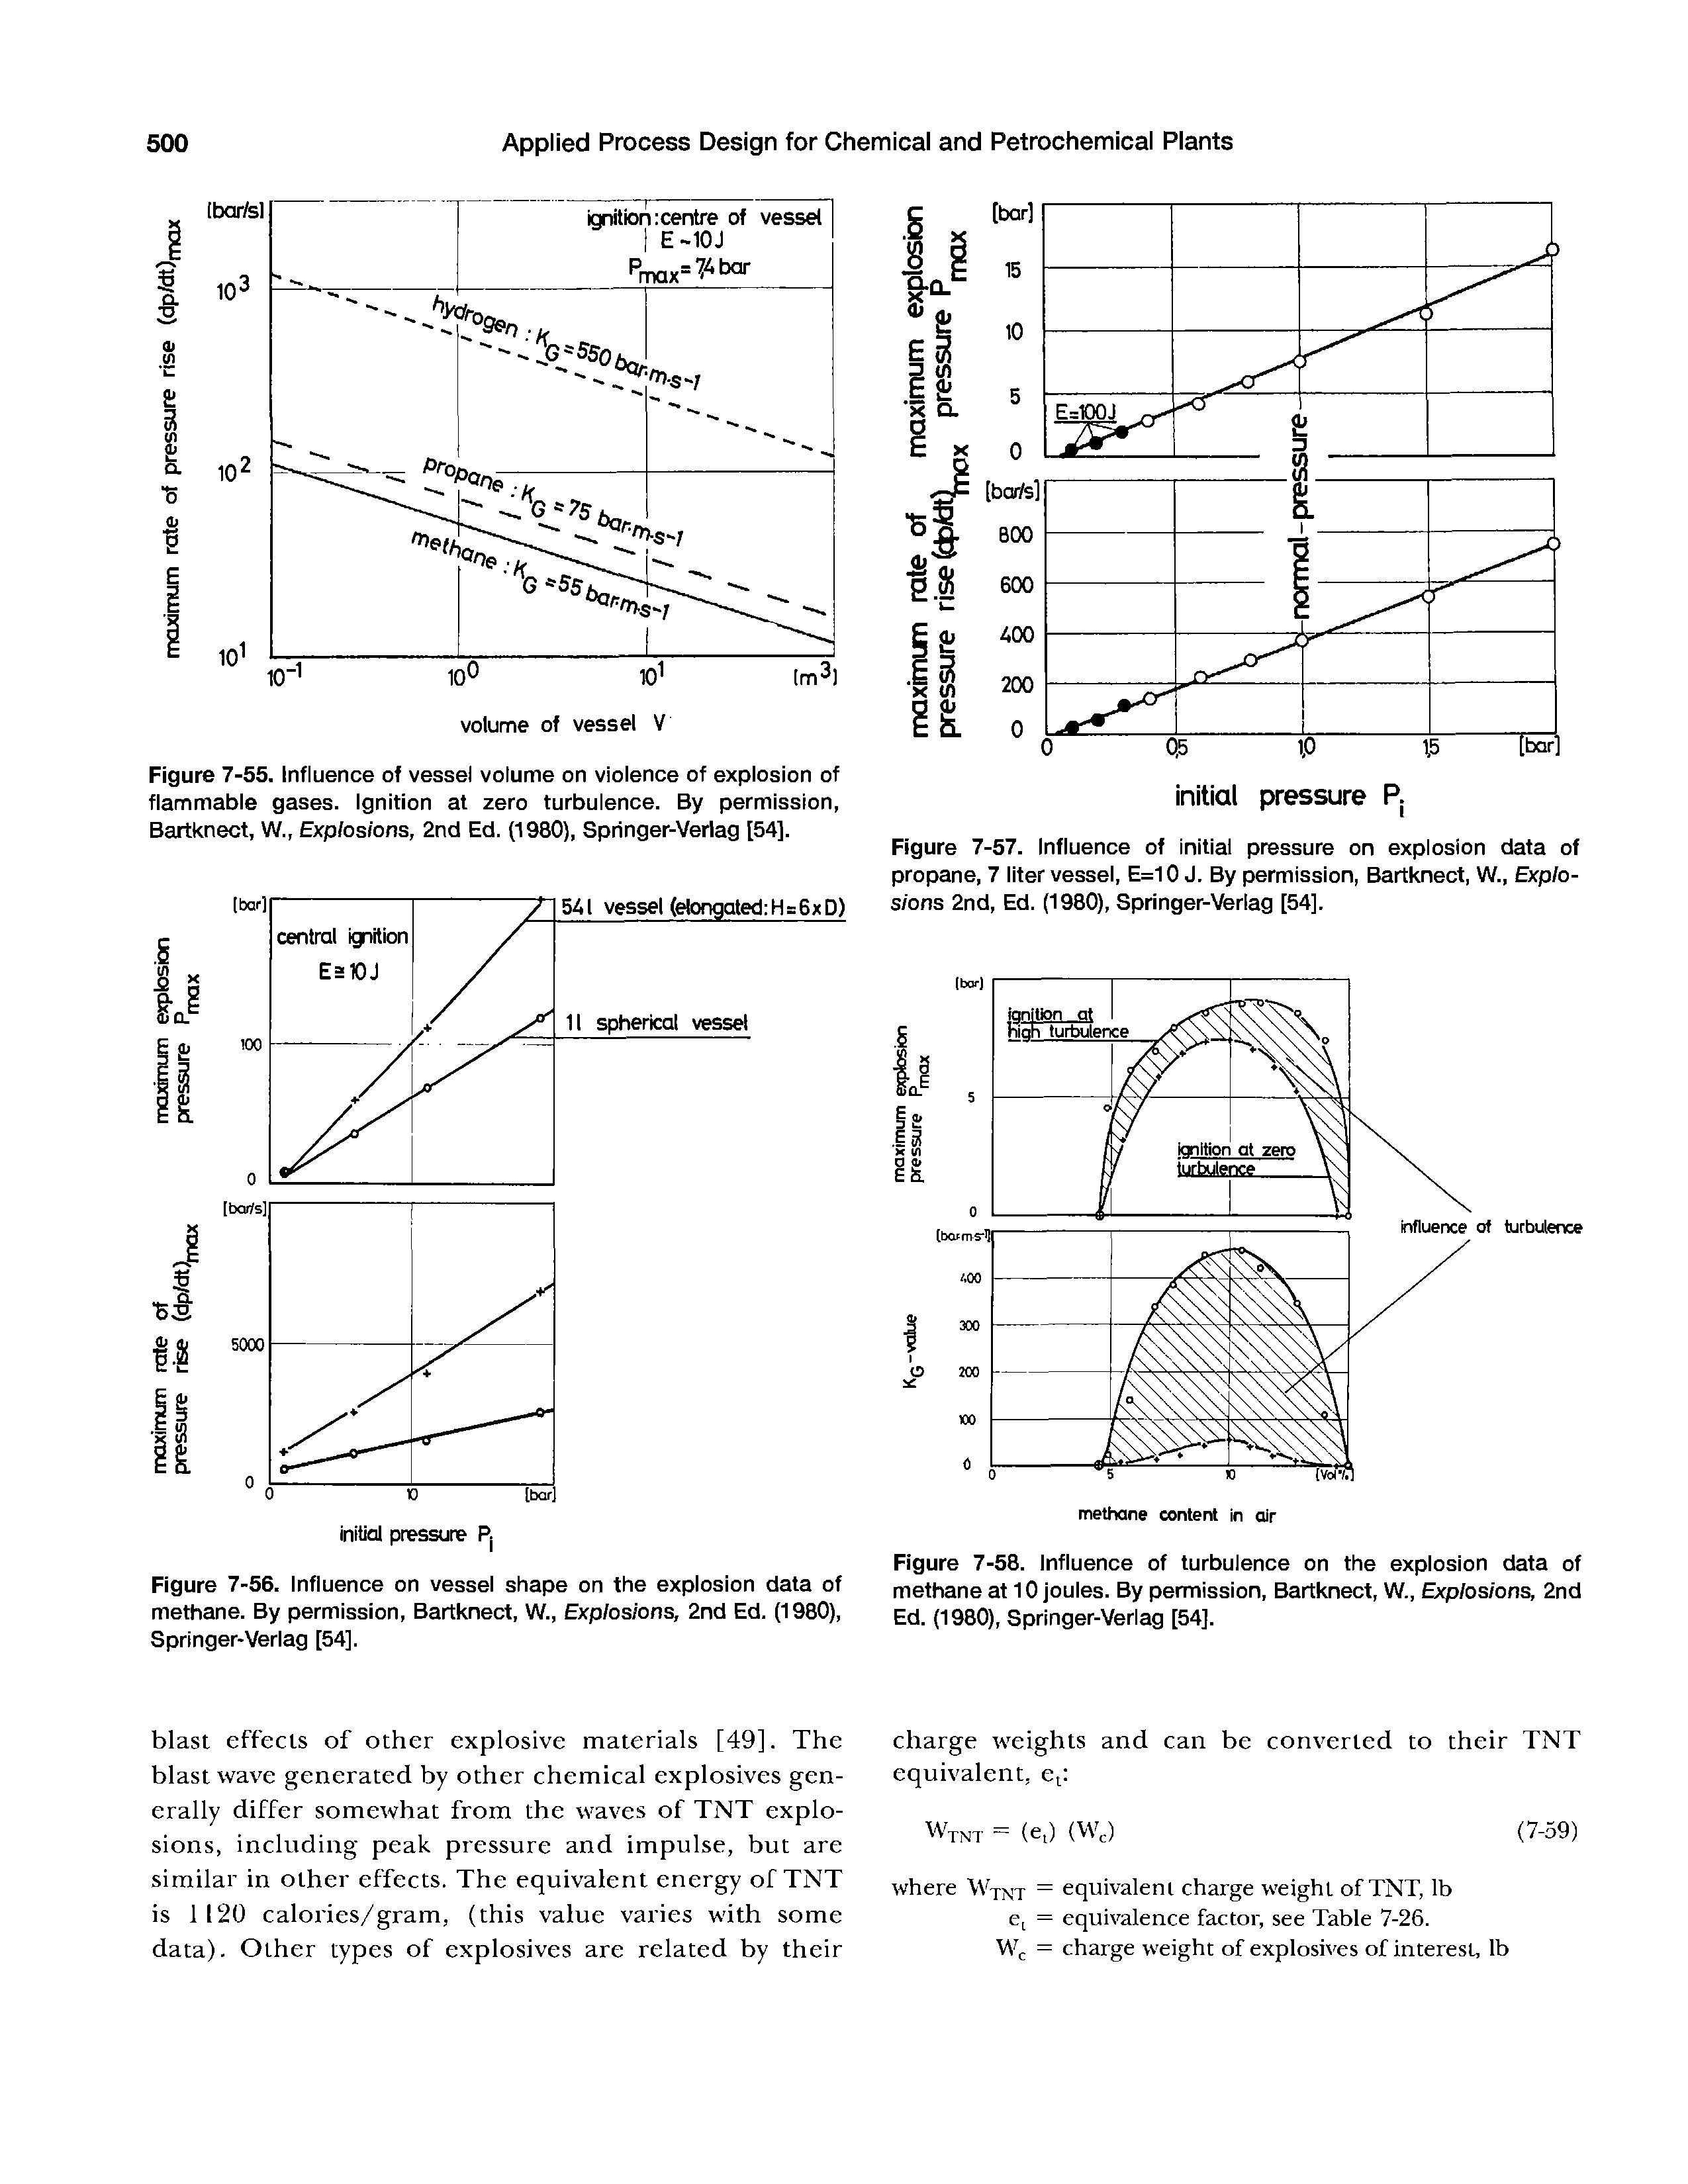 Figure 7-56. Influence on vessel shape on the explosion data of methane. By permission, Bartknect, W., Explosions, 2nd Ed. (1980), Springer-Verlag [54].